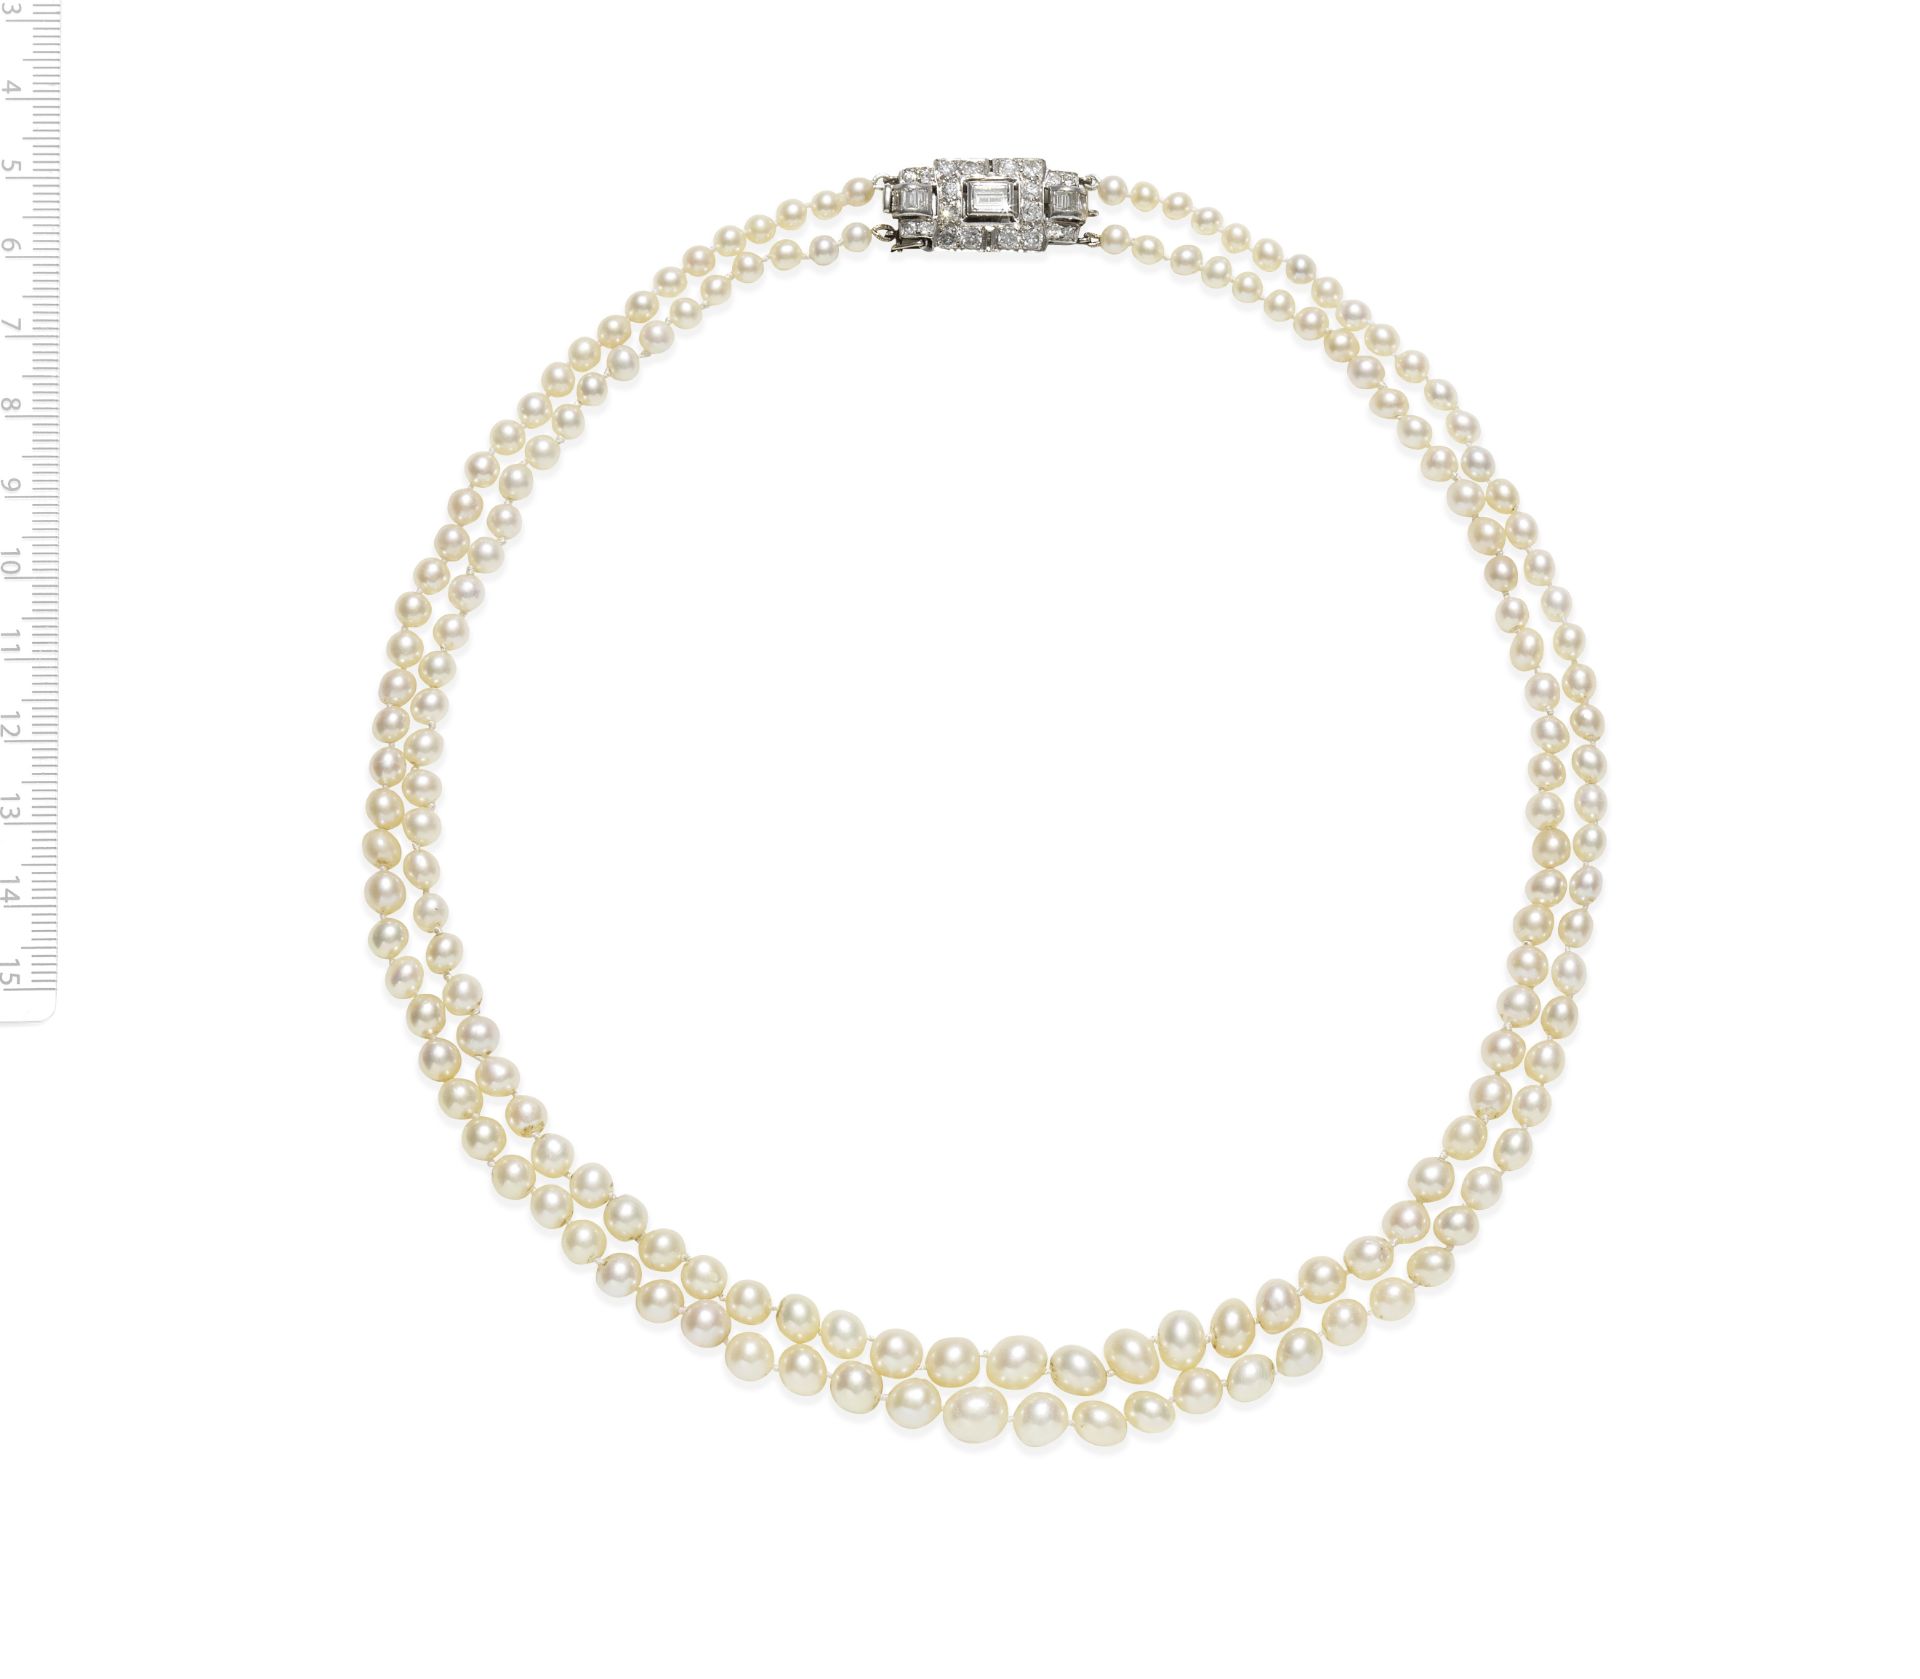 ART DECO TWO-ROW NATURAL PEARL AND DIAMOND NECKLACE, CIRCA 1925